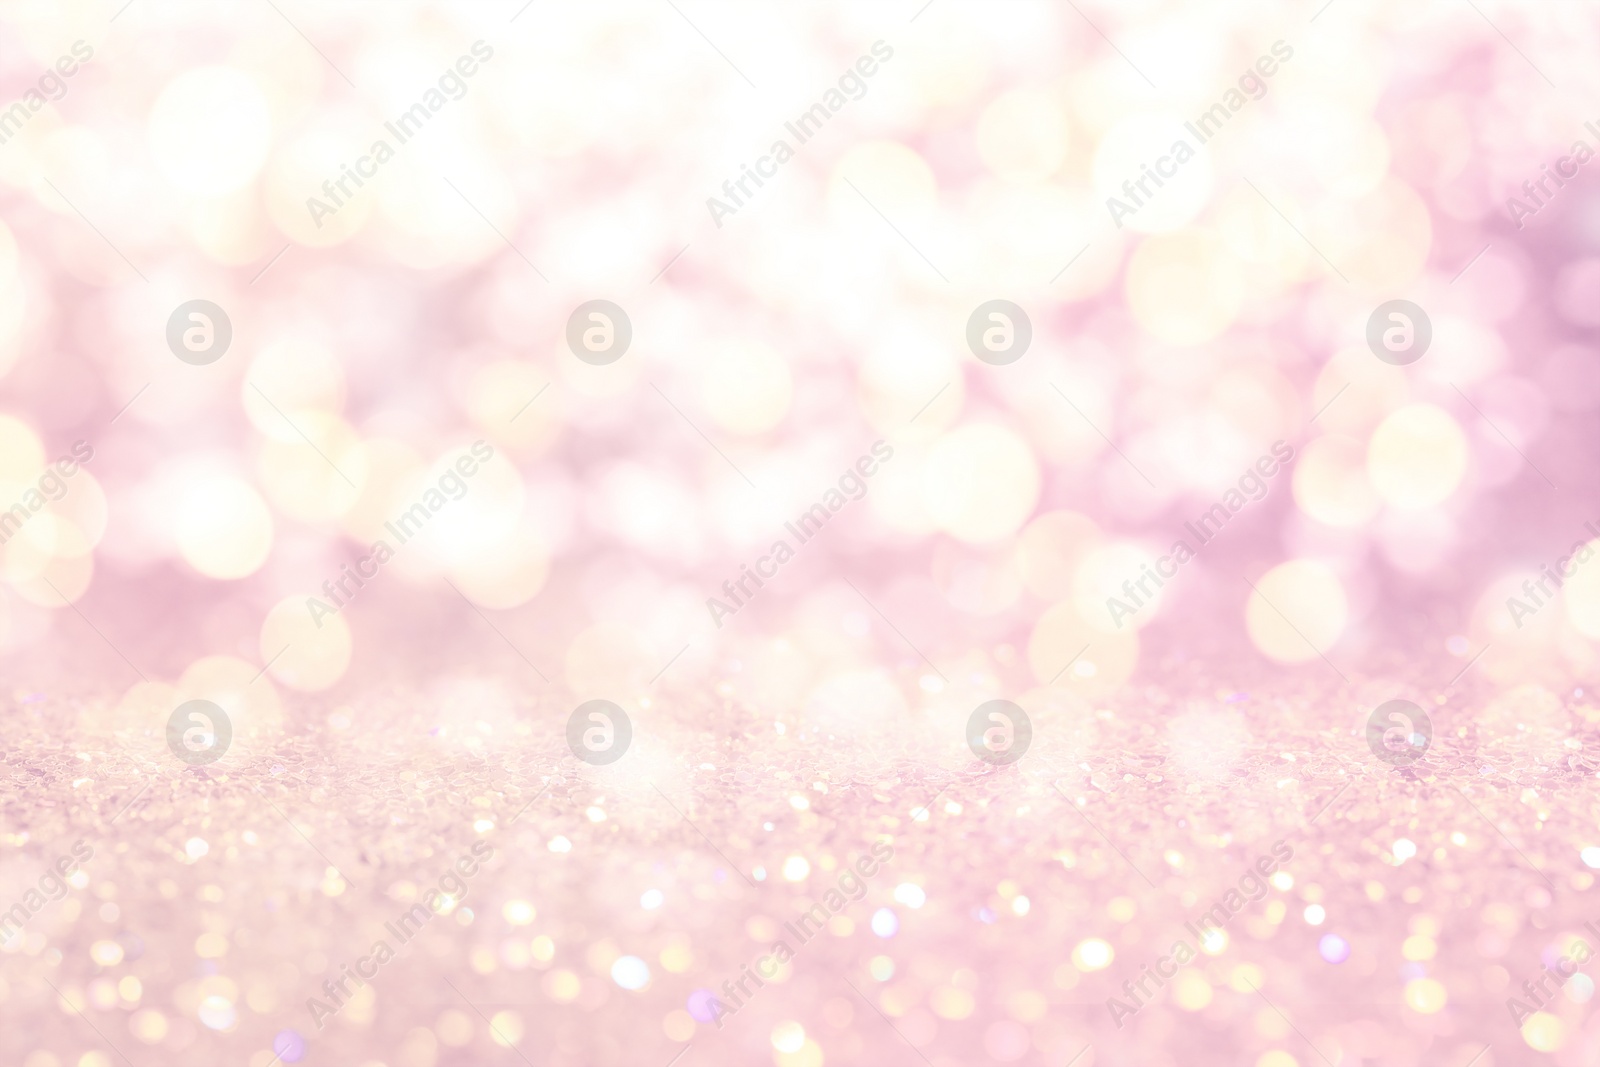 Image of Blurred view of pink glitter as abstract background, bokeh effect